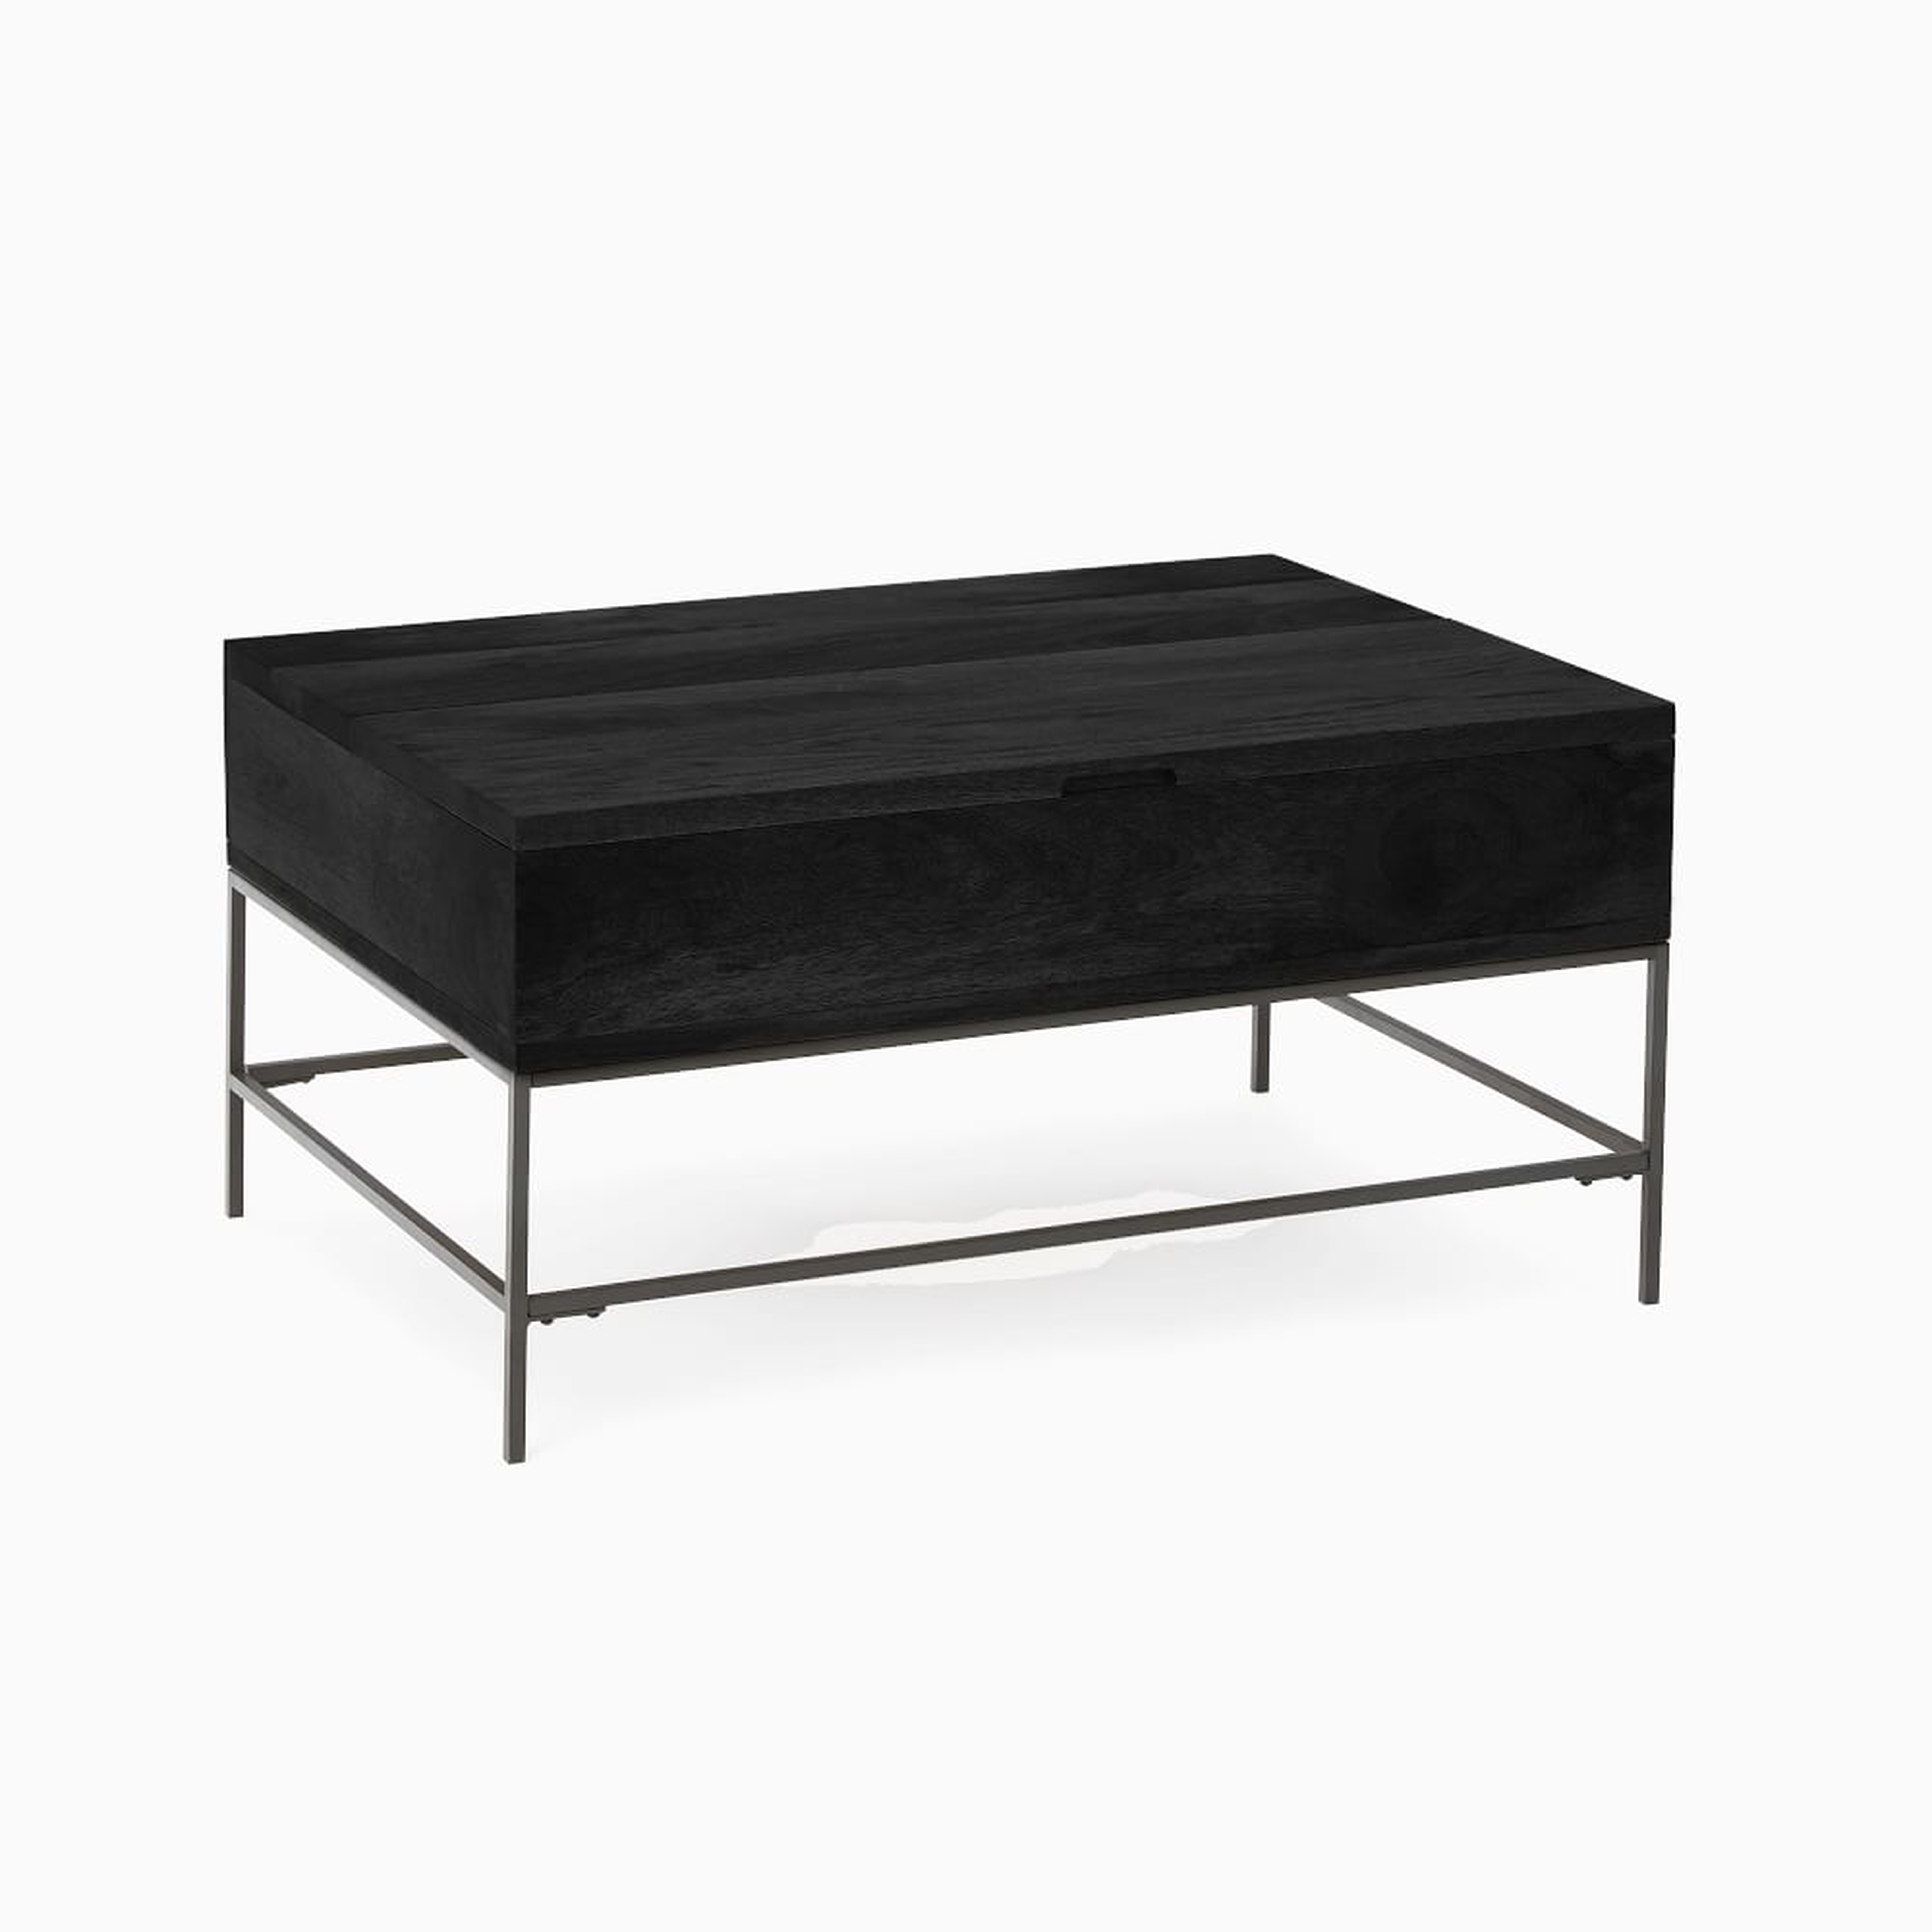 Industrial Storage Collection Black Industrial Storage Coffee Table 36 Inch - West Elm